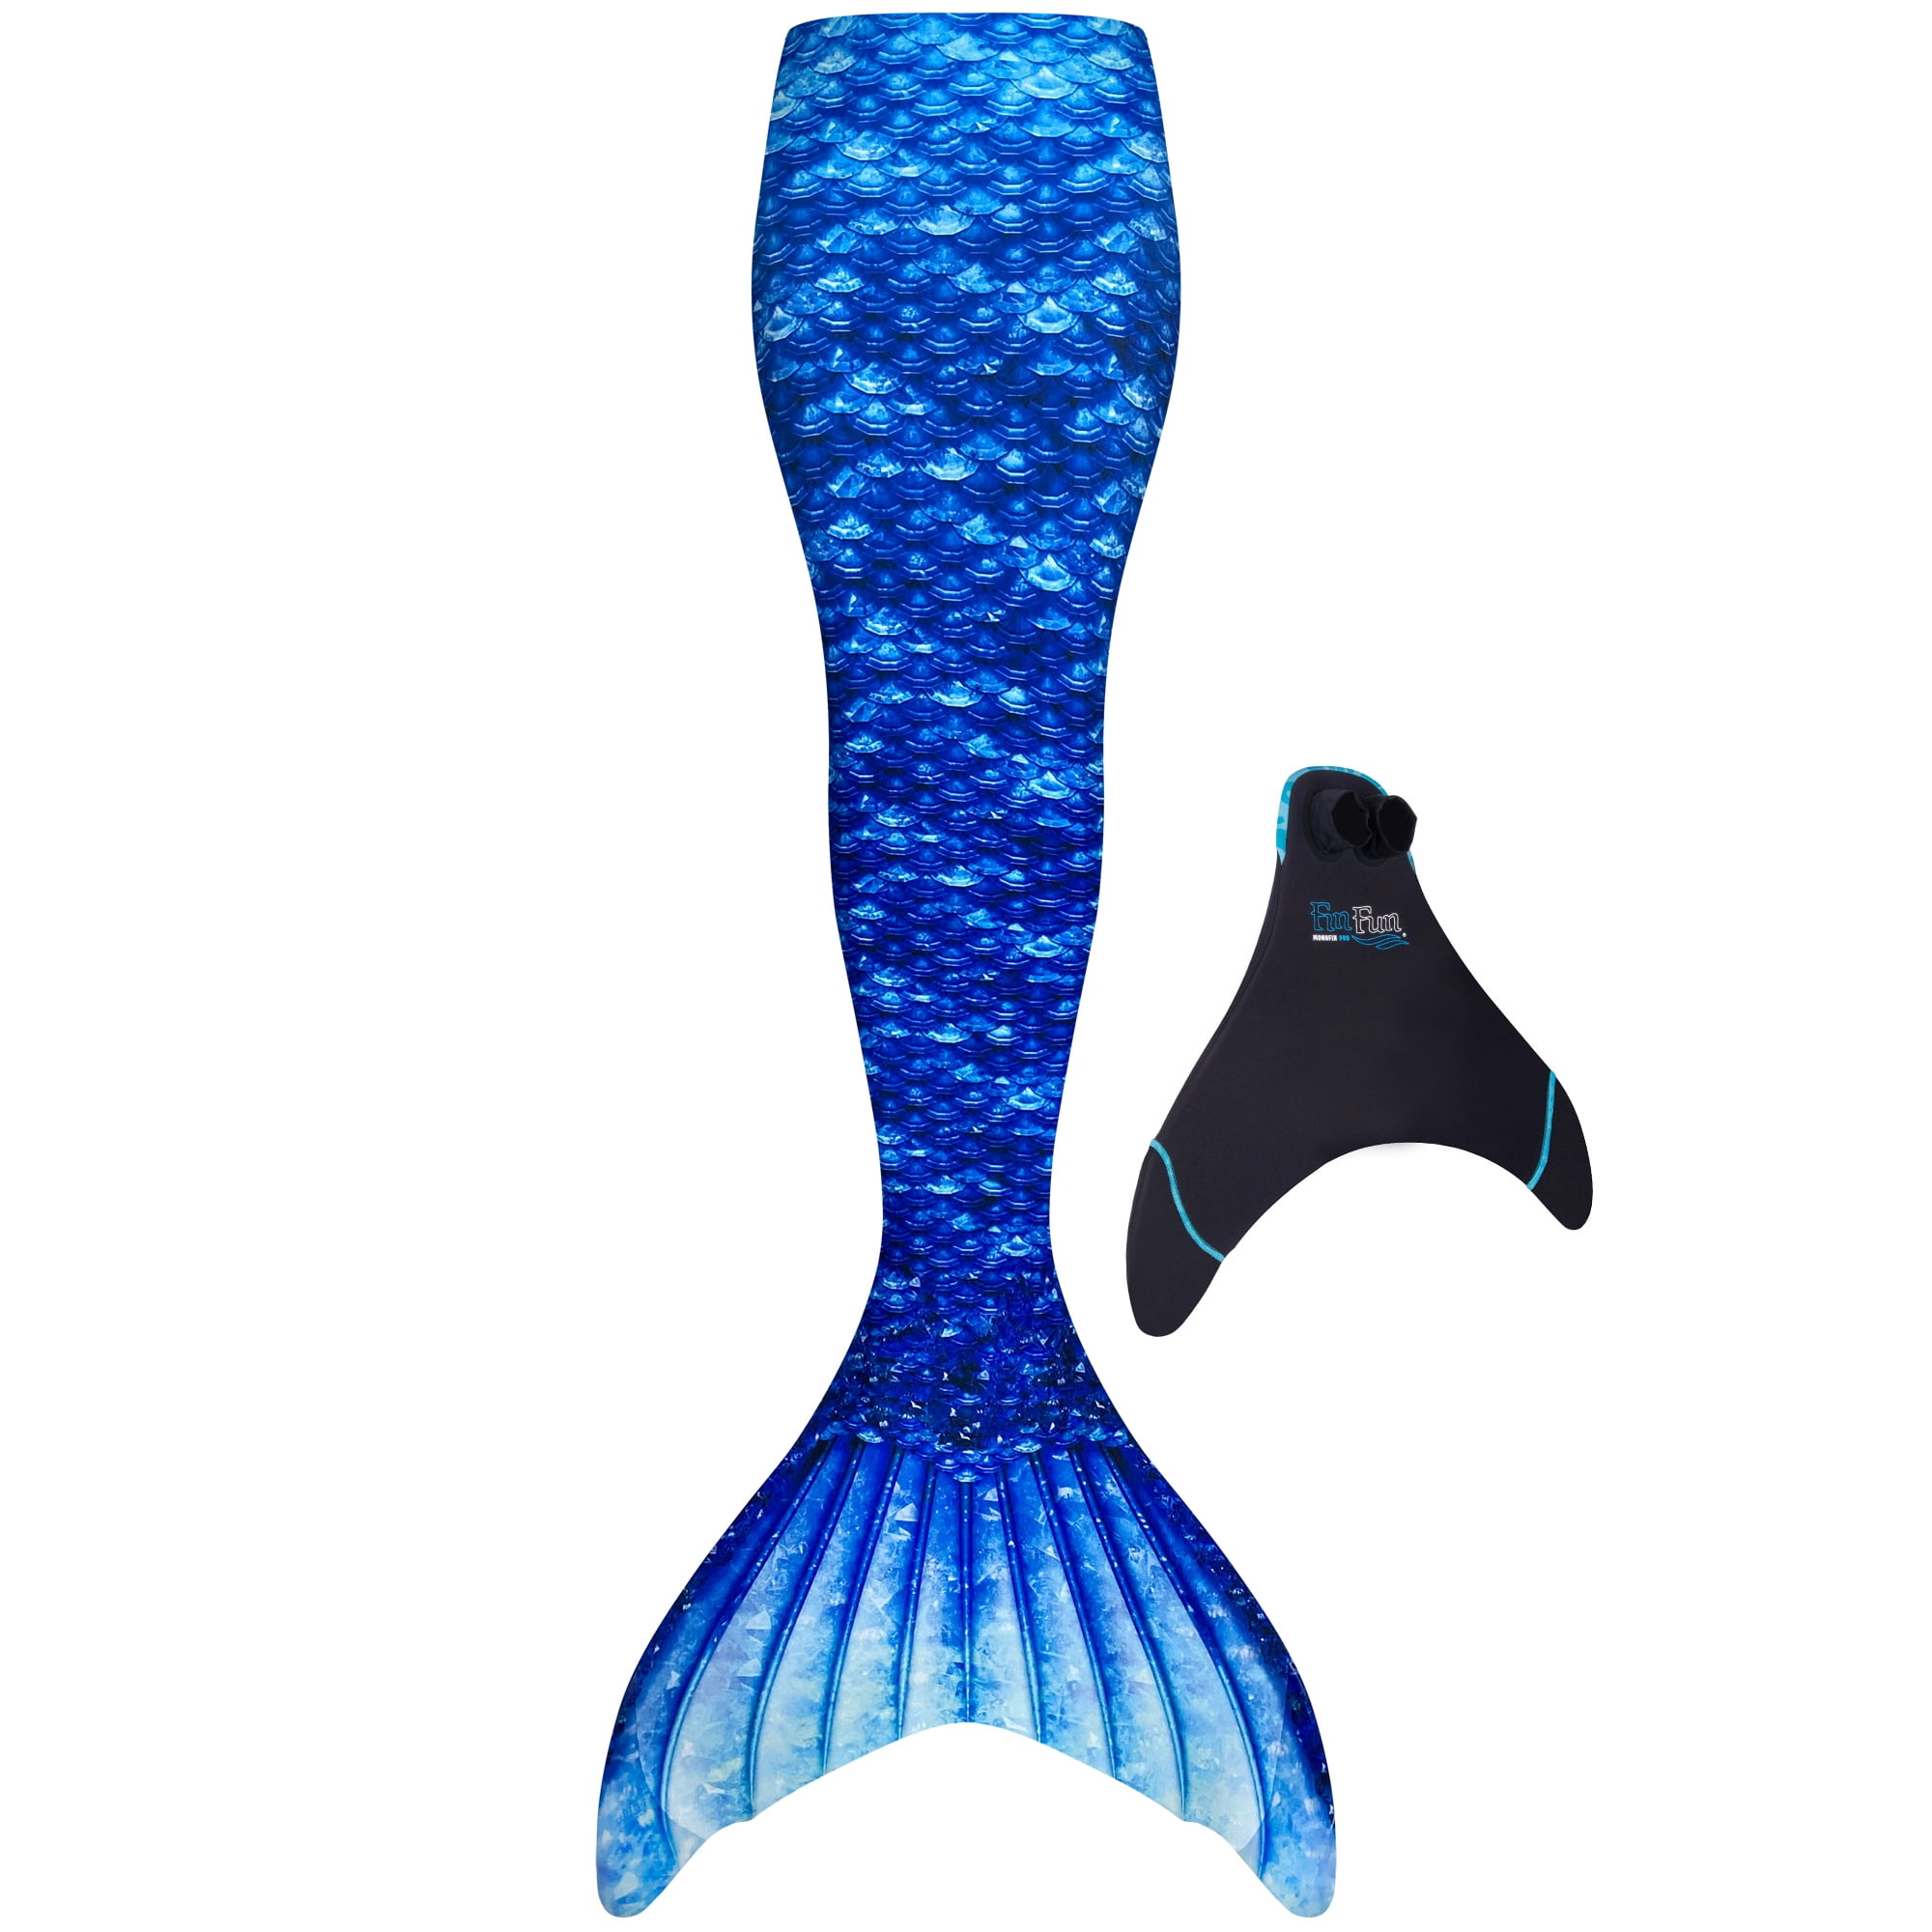 IOUTDOOR Mermaid Fins Monofin for Swimming,Training Diving Fins Swimming Fins for Kids Adults 